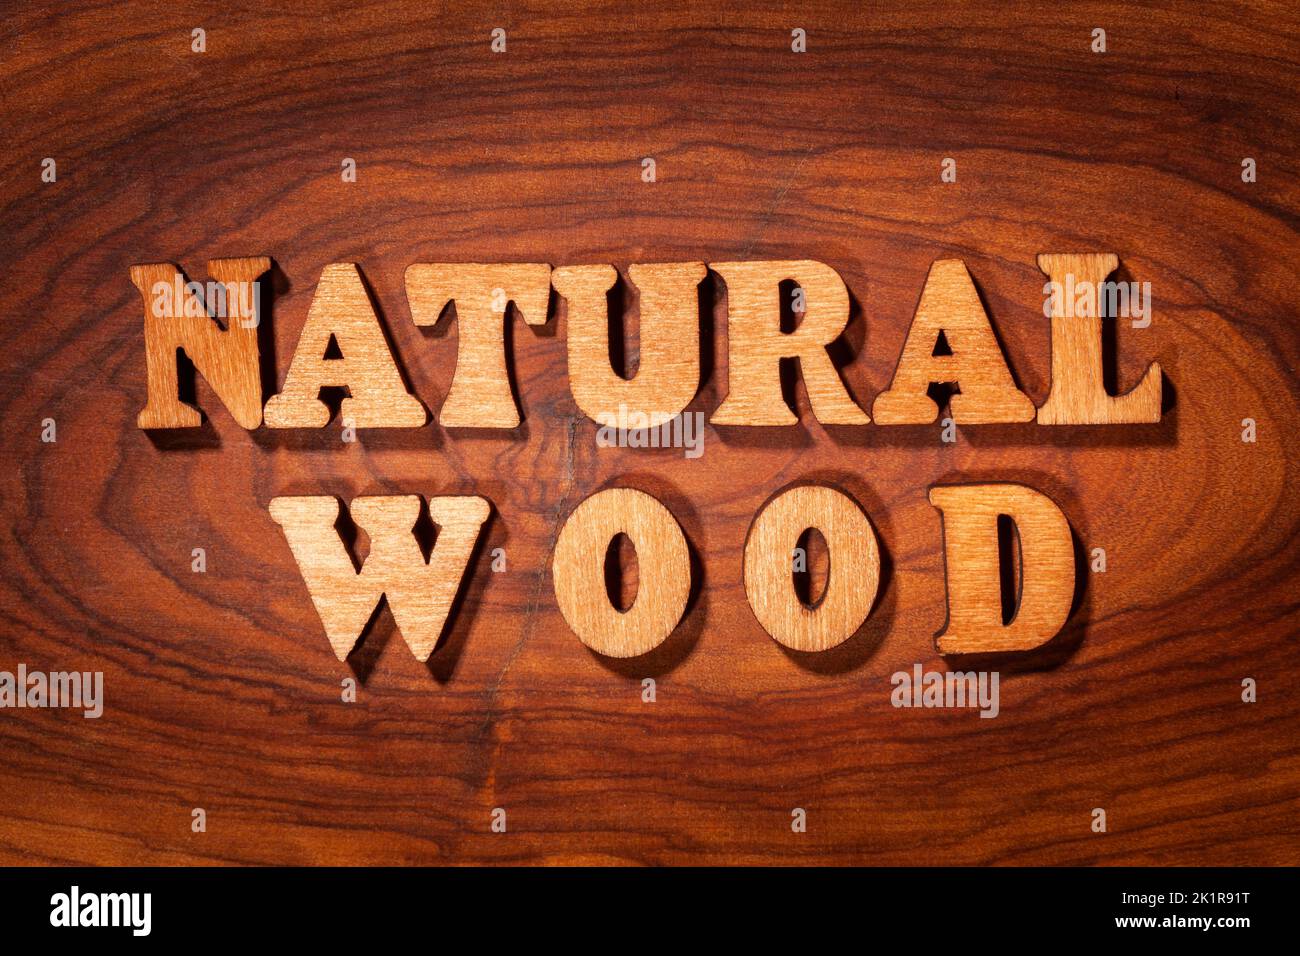 Natural wood - Inscription by wooden letters close up Stock Photo